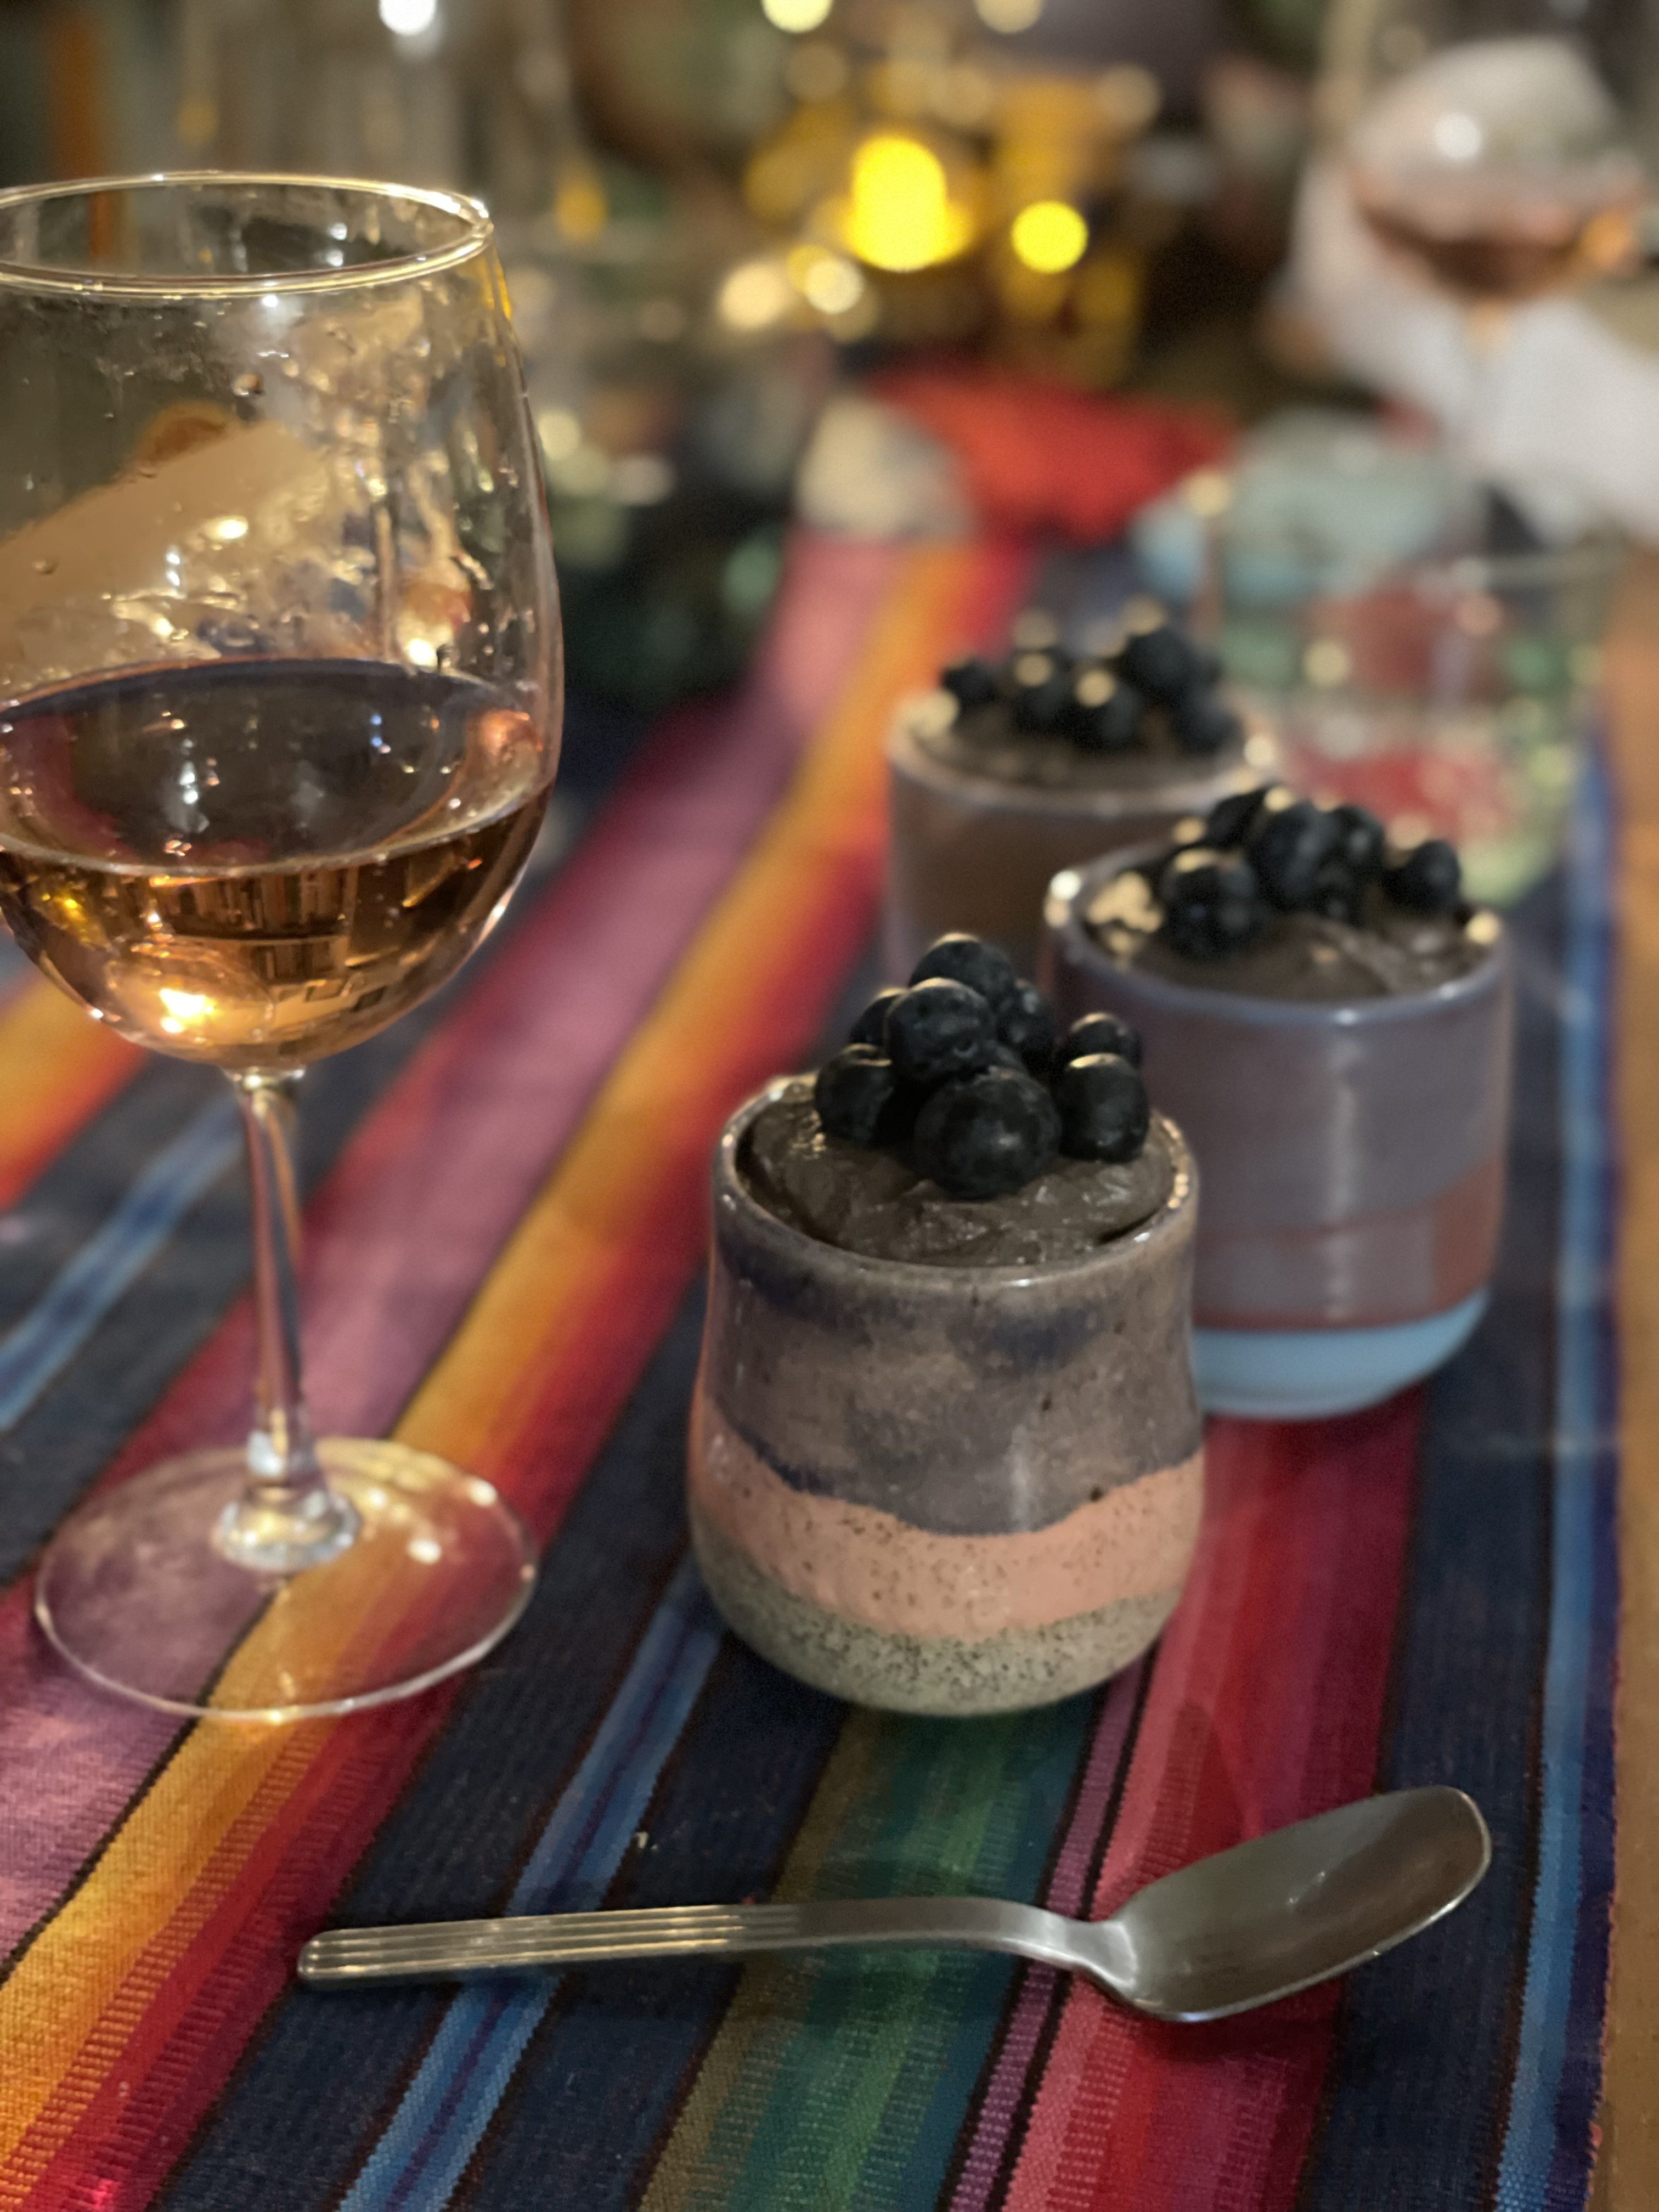 Small ceramic vessel with chocolate coconut cream mousse and topped with blueberries